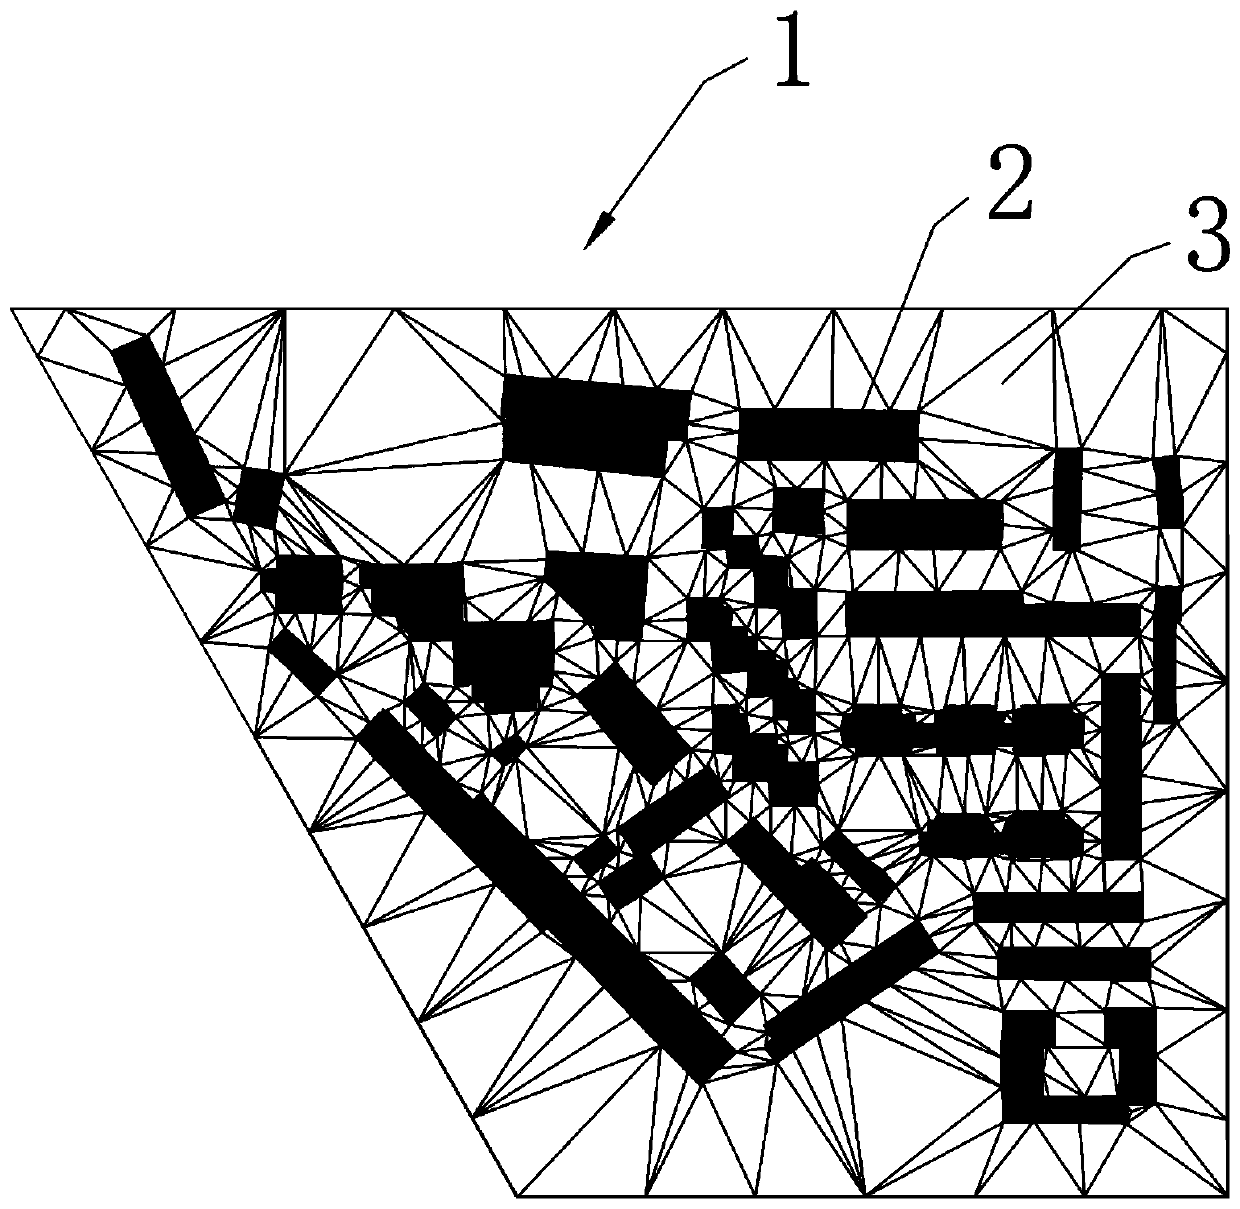 A Multi-scale Residential Place Matching Method Oriented to Spatial Division